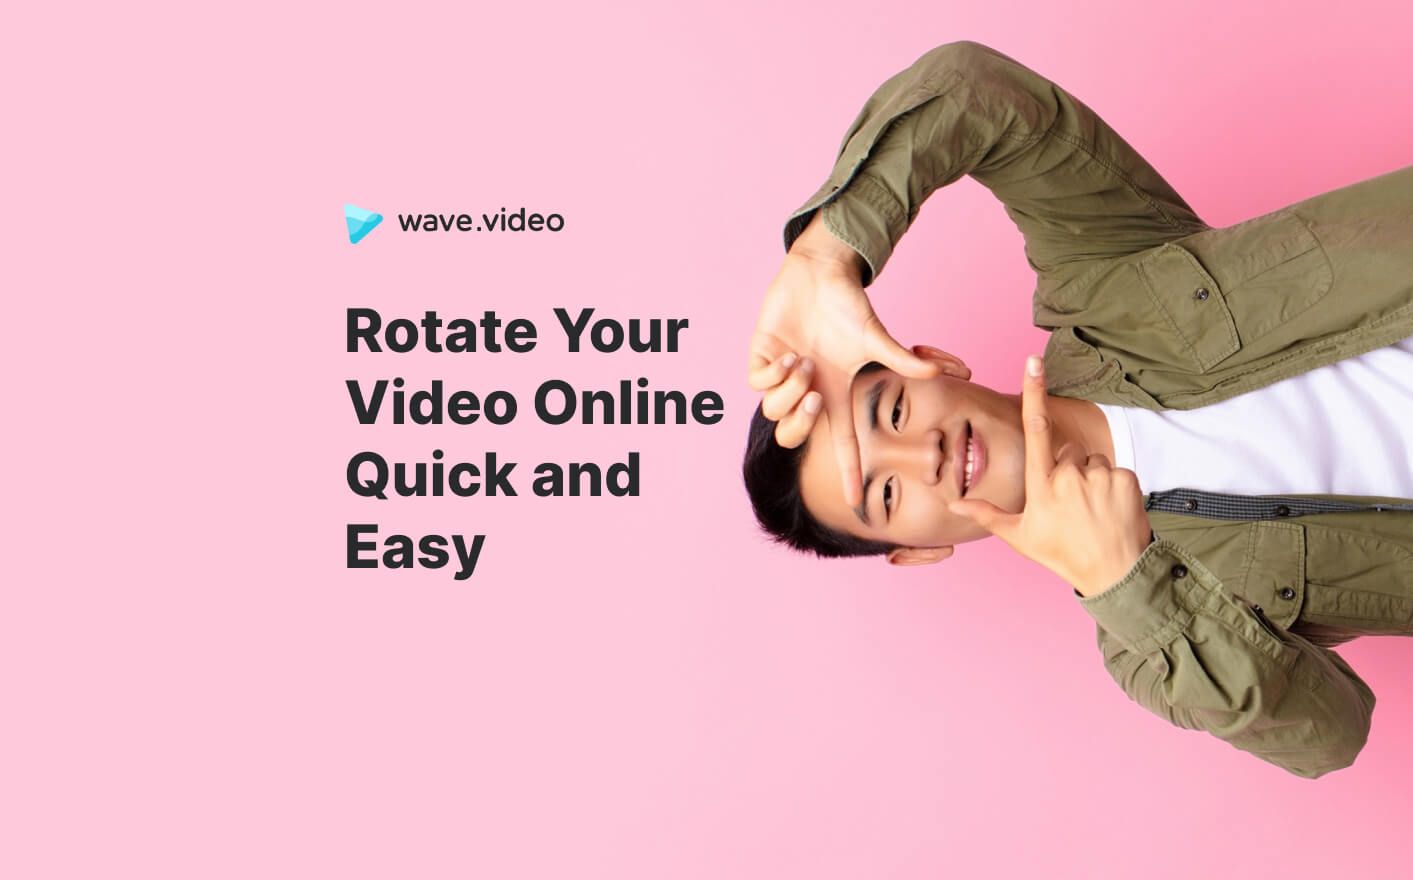 How to rotate video online